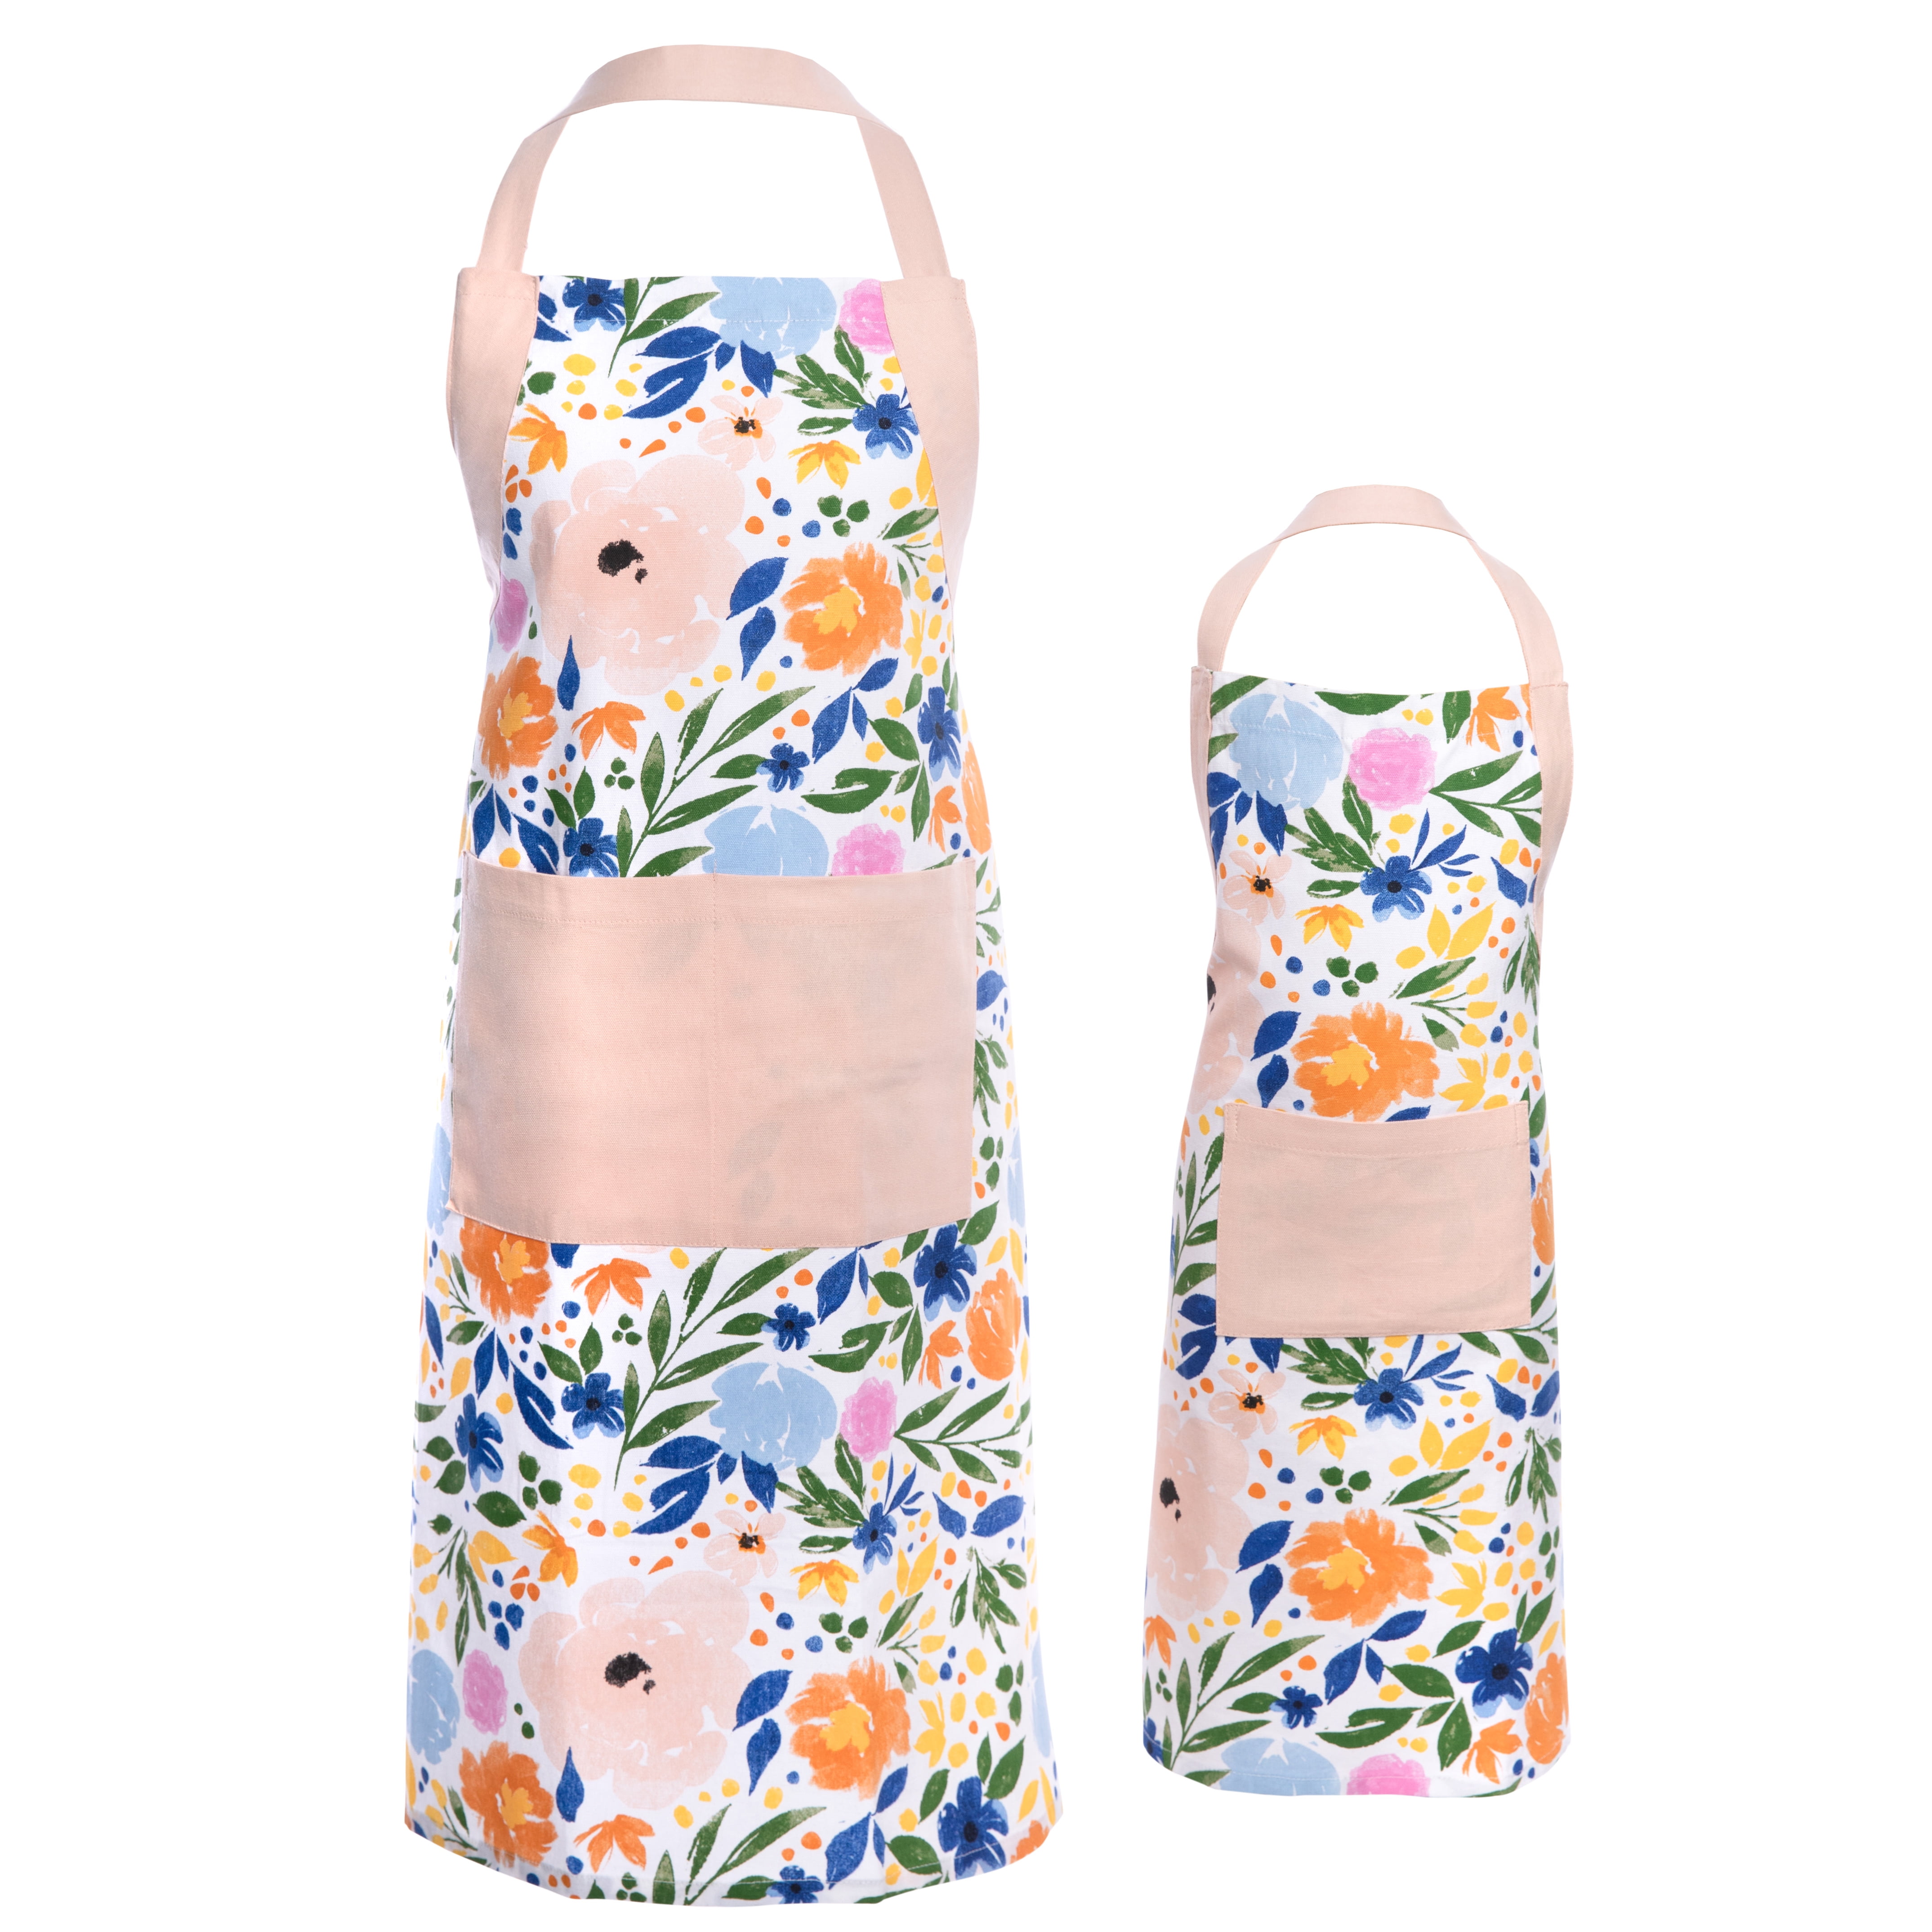  Baksmill 2 Pack Mommy and Me Matching Aprons Mother Daughter  Aprons with Pocket Adjustable Parent Child Aprons for Kids and Adults  Grandma and Me Girls Kitchen Aprons Baking Cooking Gardening Painting 